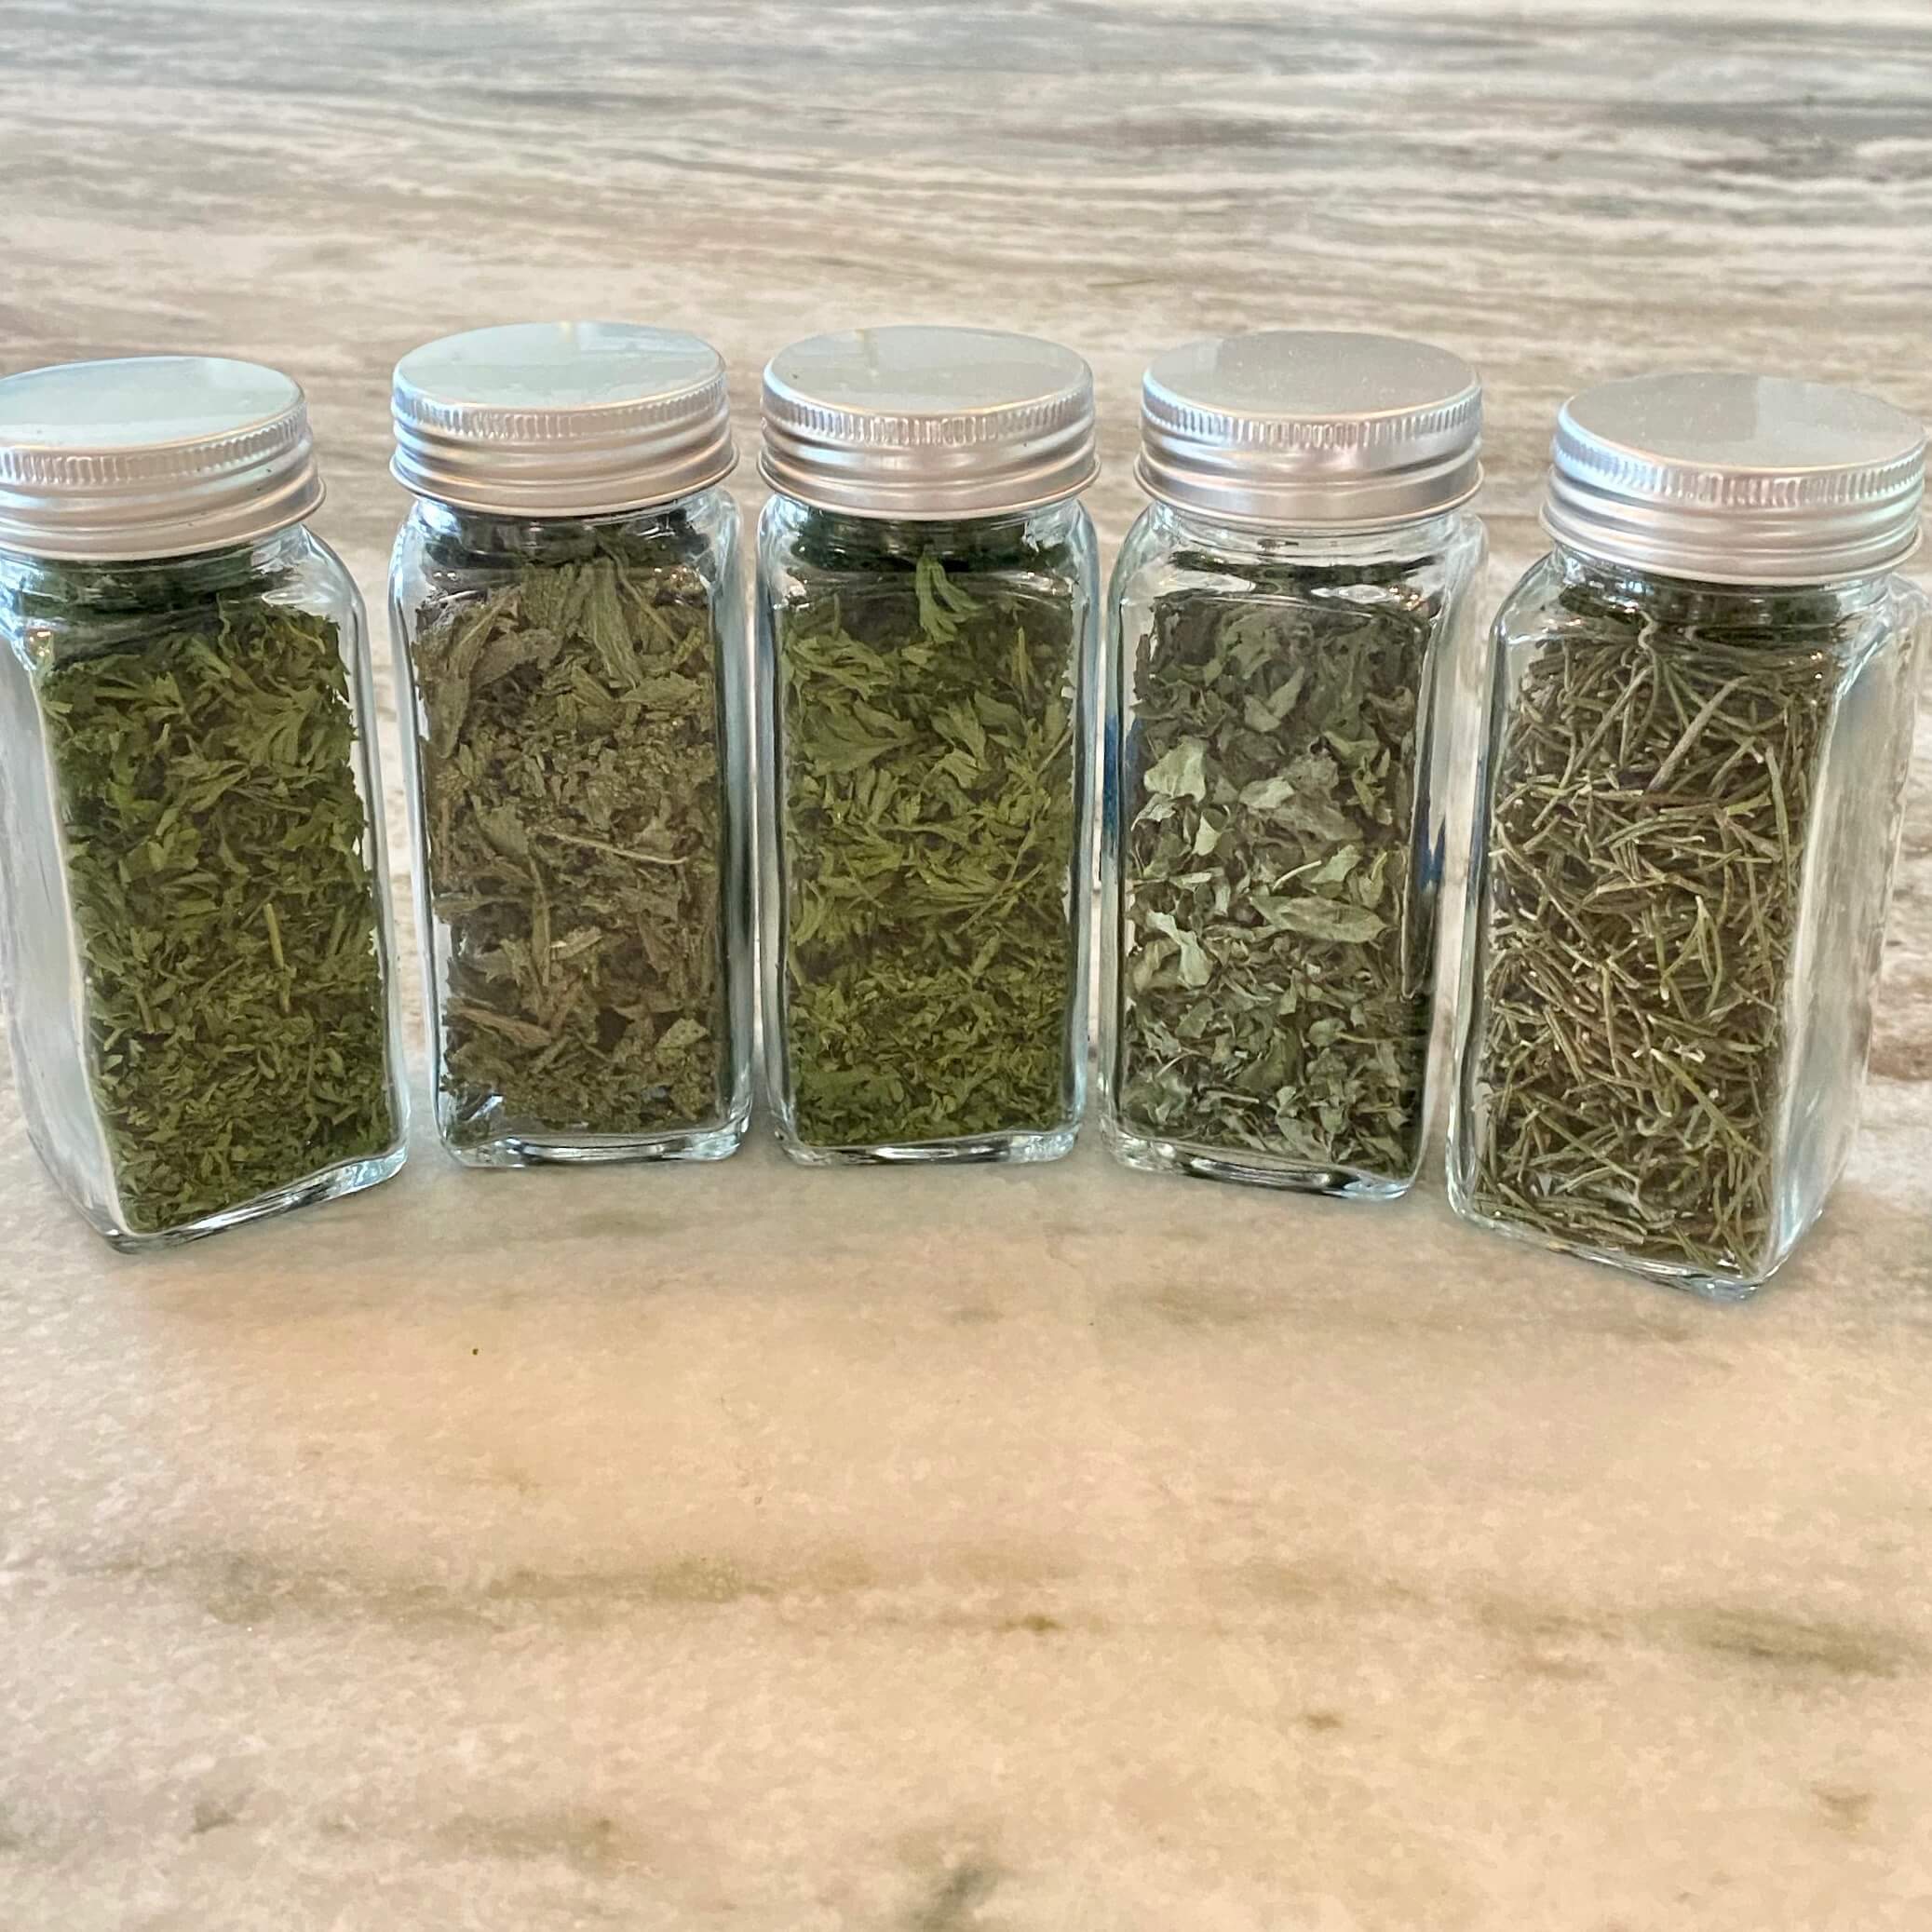 How Long Are Dried Herbs Good For